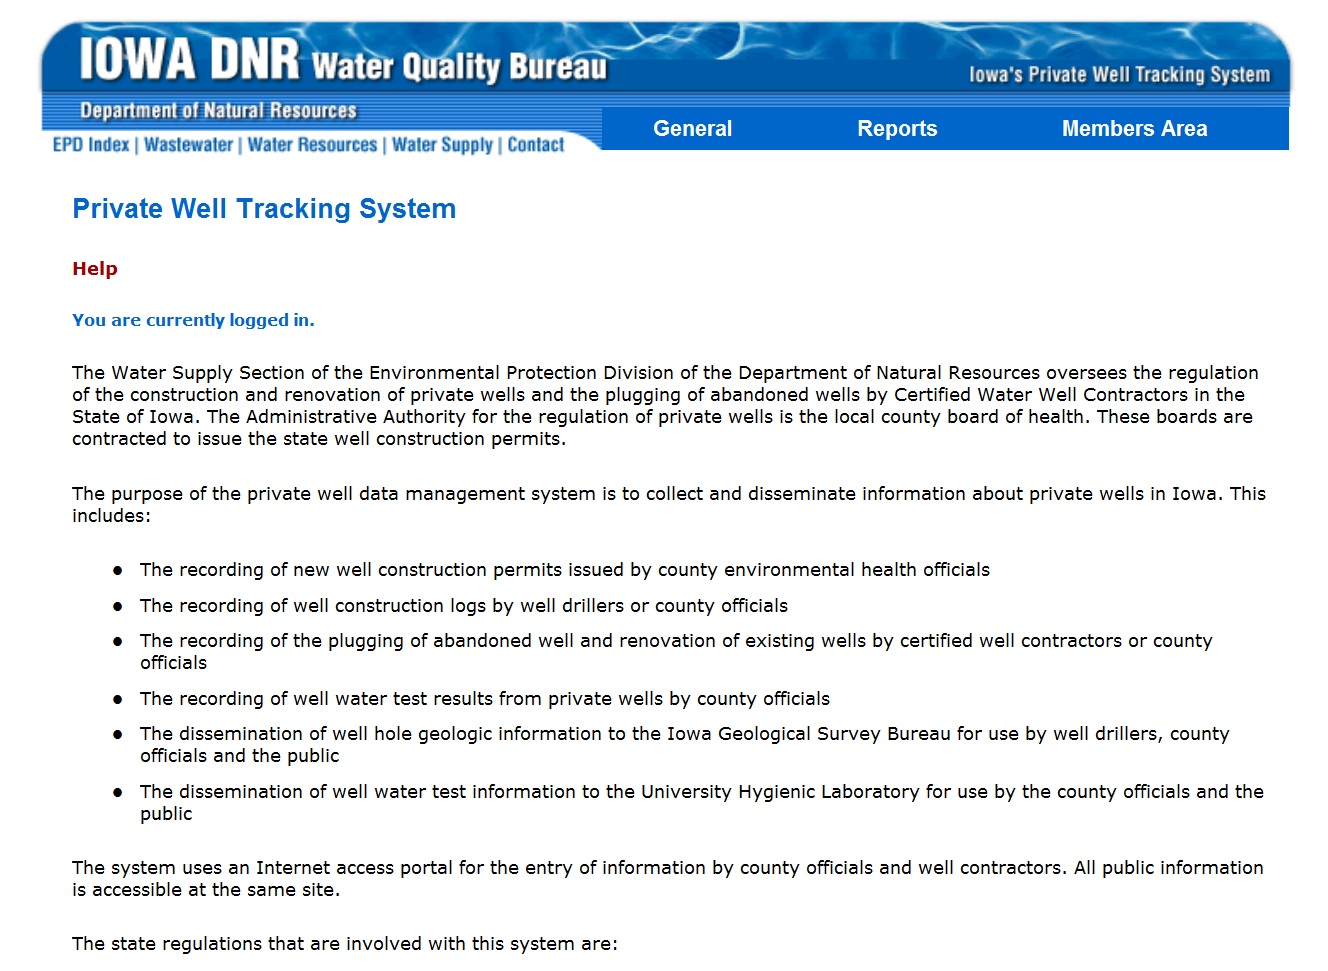 Iowa DNR Private Well Tracking System Database screen image